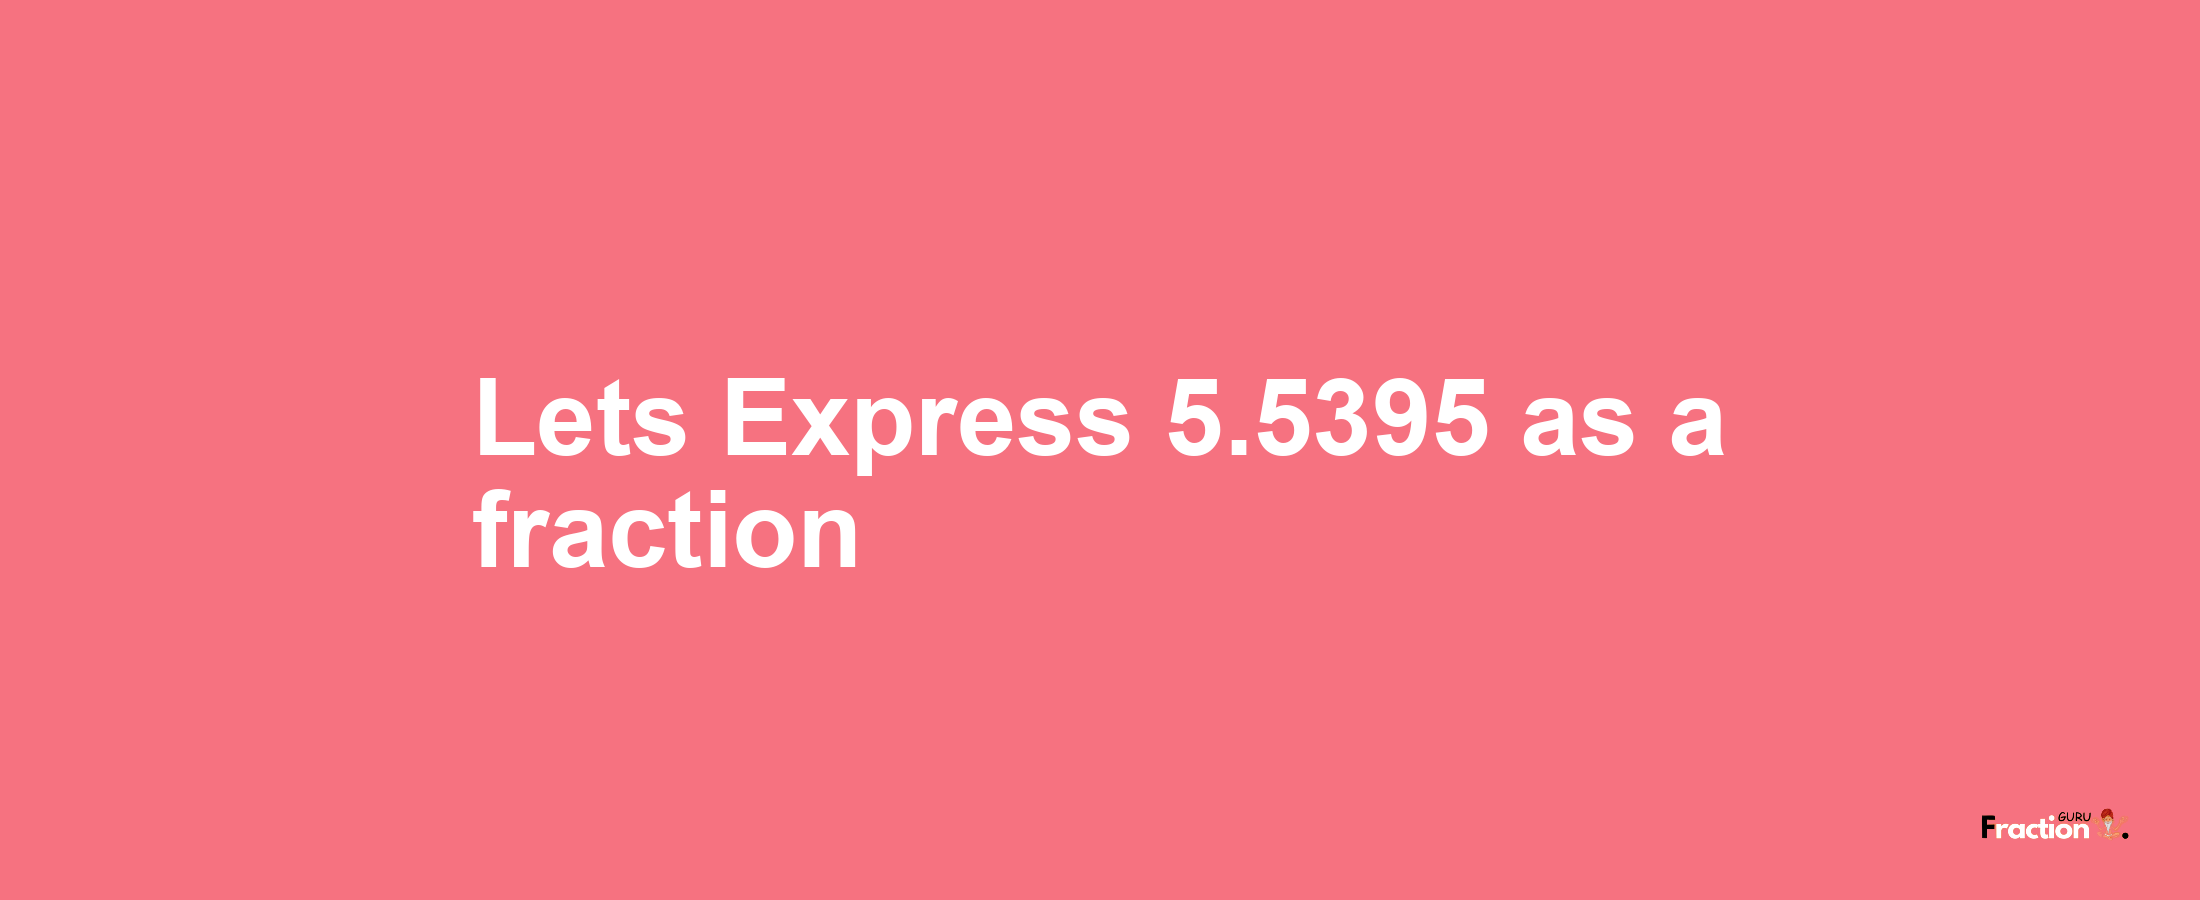 Lets Express 5.5395 as afraction